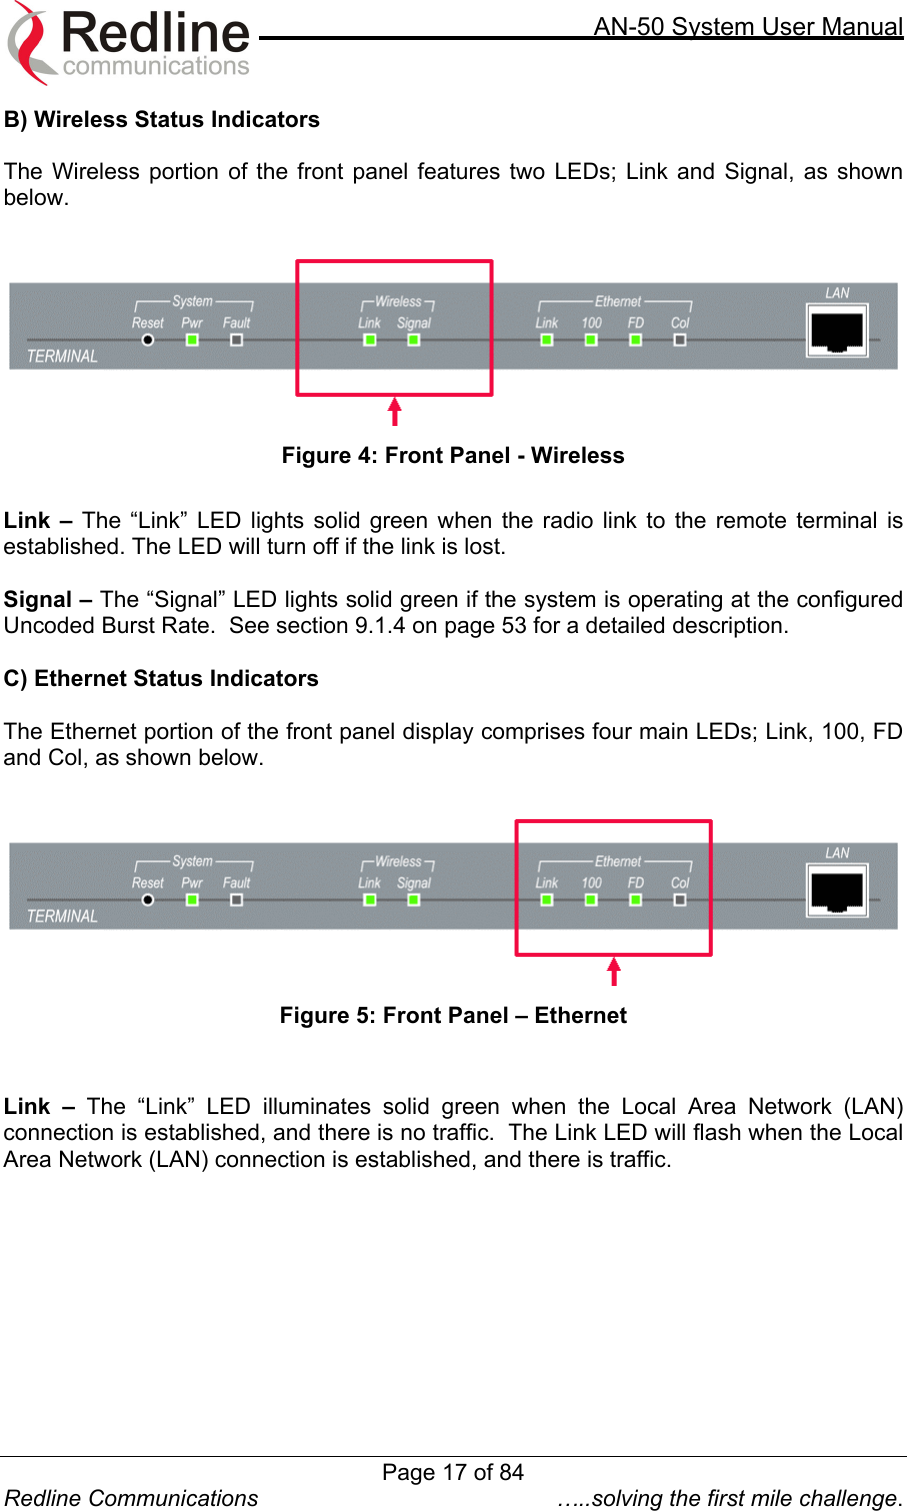     AN-50 System User Manual  Redline Communications  …..solving the first mile challenge. B) Wireless Status Indicators  The Wireless portion of the front panel features two LEDs; Link and Signal, as shown below.   Figure 4: Front Panel - Wireless  Link – The “Link” LED lights solid green when the radio link to the remote terminal is established. The LED will turn off if the link is lost.   Signal – The “Signal” LED lights solid green if the system is operating at the configured Uncoded Burst Rate.  See section 9.1.4 on page 53 for a detailed description.  C) Ethernet Status Indicators  The Ethernet portion of the front panel display comprises four main LEDs; Link, 100, FD and Col, as shown below.   Figure 5: Front Panel – Ethernet   Link – The “Link” LED illuminates solid green when the Local Area Network (LAN) connection is established, and there is no traffic.  The Link LED will flash when the Local Area Network (LAN) connection is established, and there is traffic.  Page 17 of 84